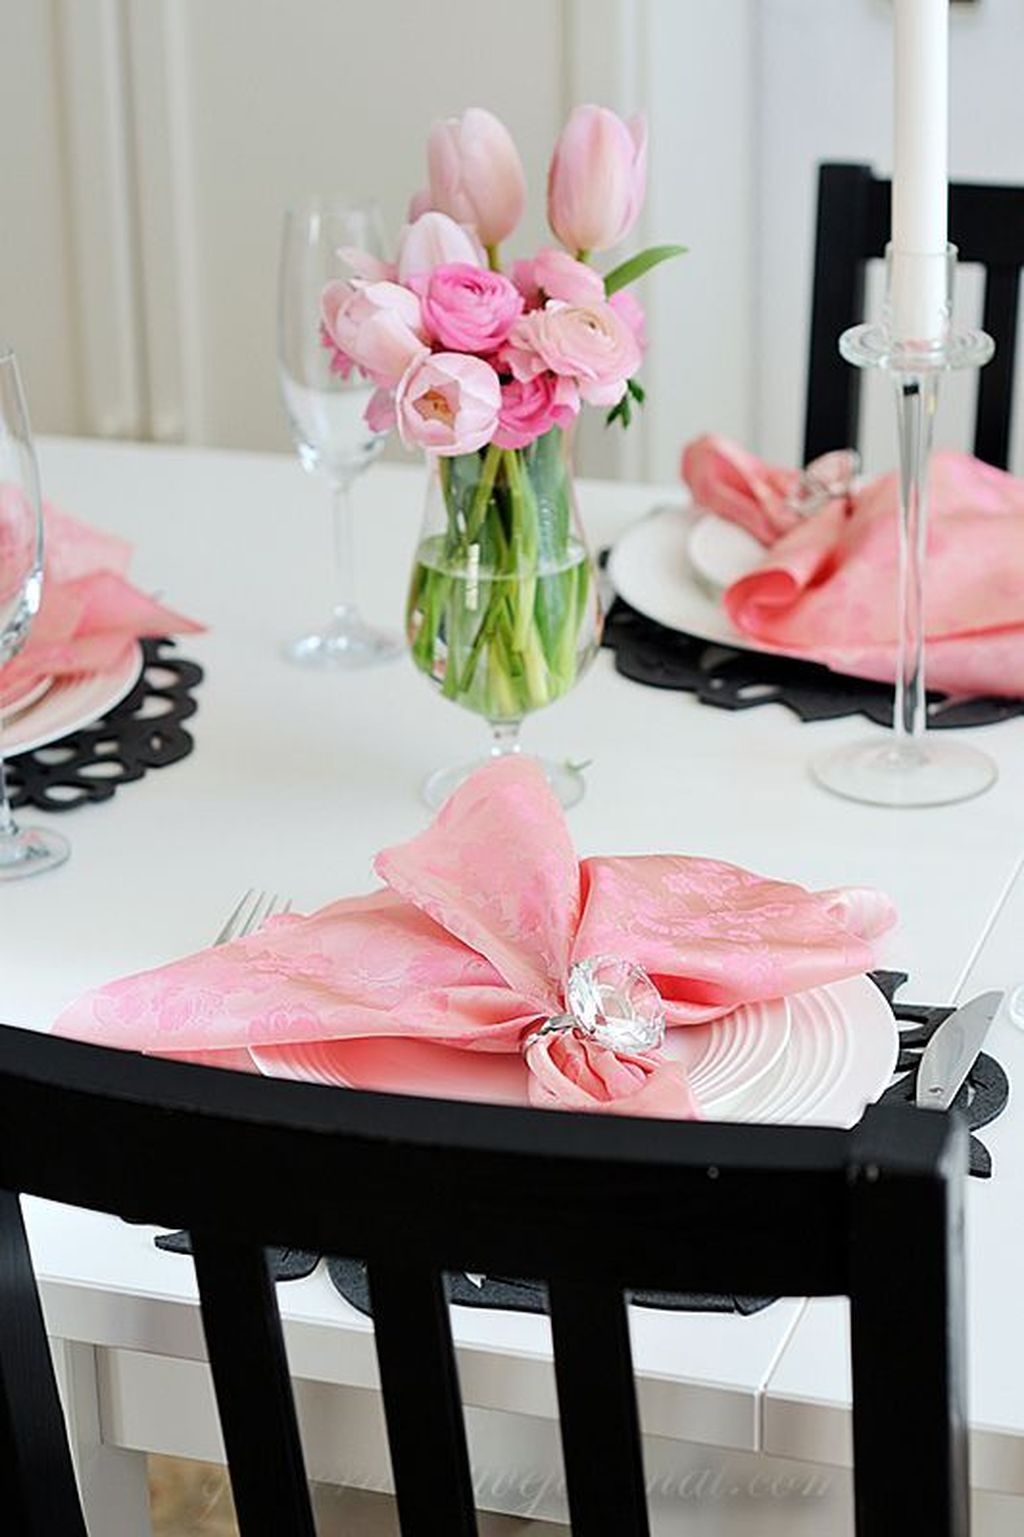 Most Inspiring Valentine’s Day Simple Table Decoration Ideas 42